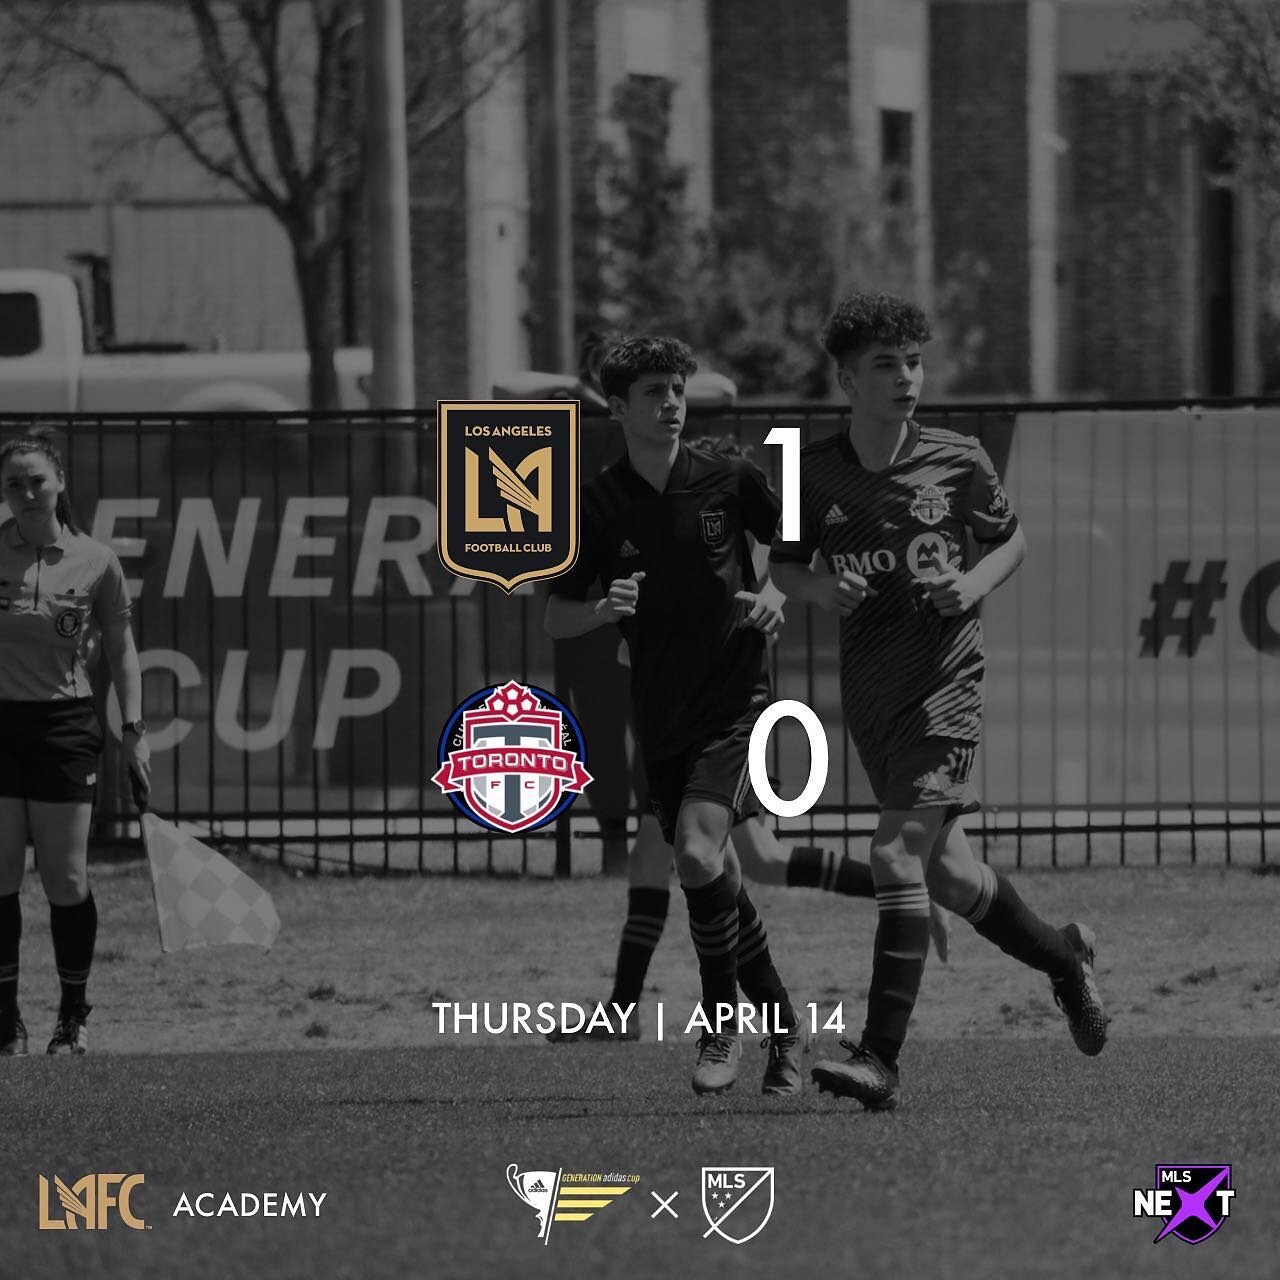 Great win yesterday against a tough Toronto FC team. Onto the semifinals vs. Portland today at 5pm CST/3pm PST. @lafcacademy @mlsnext #generationadidascup2022